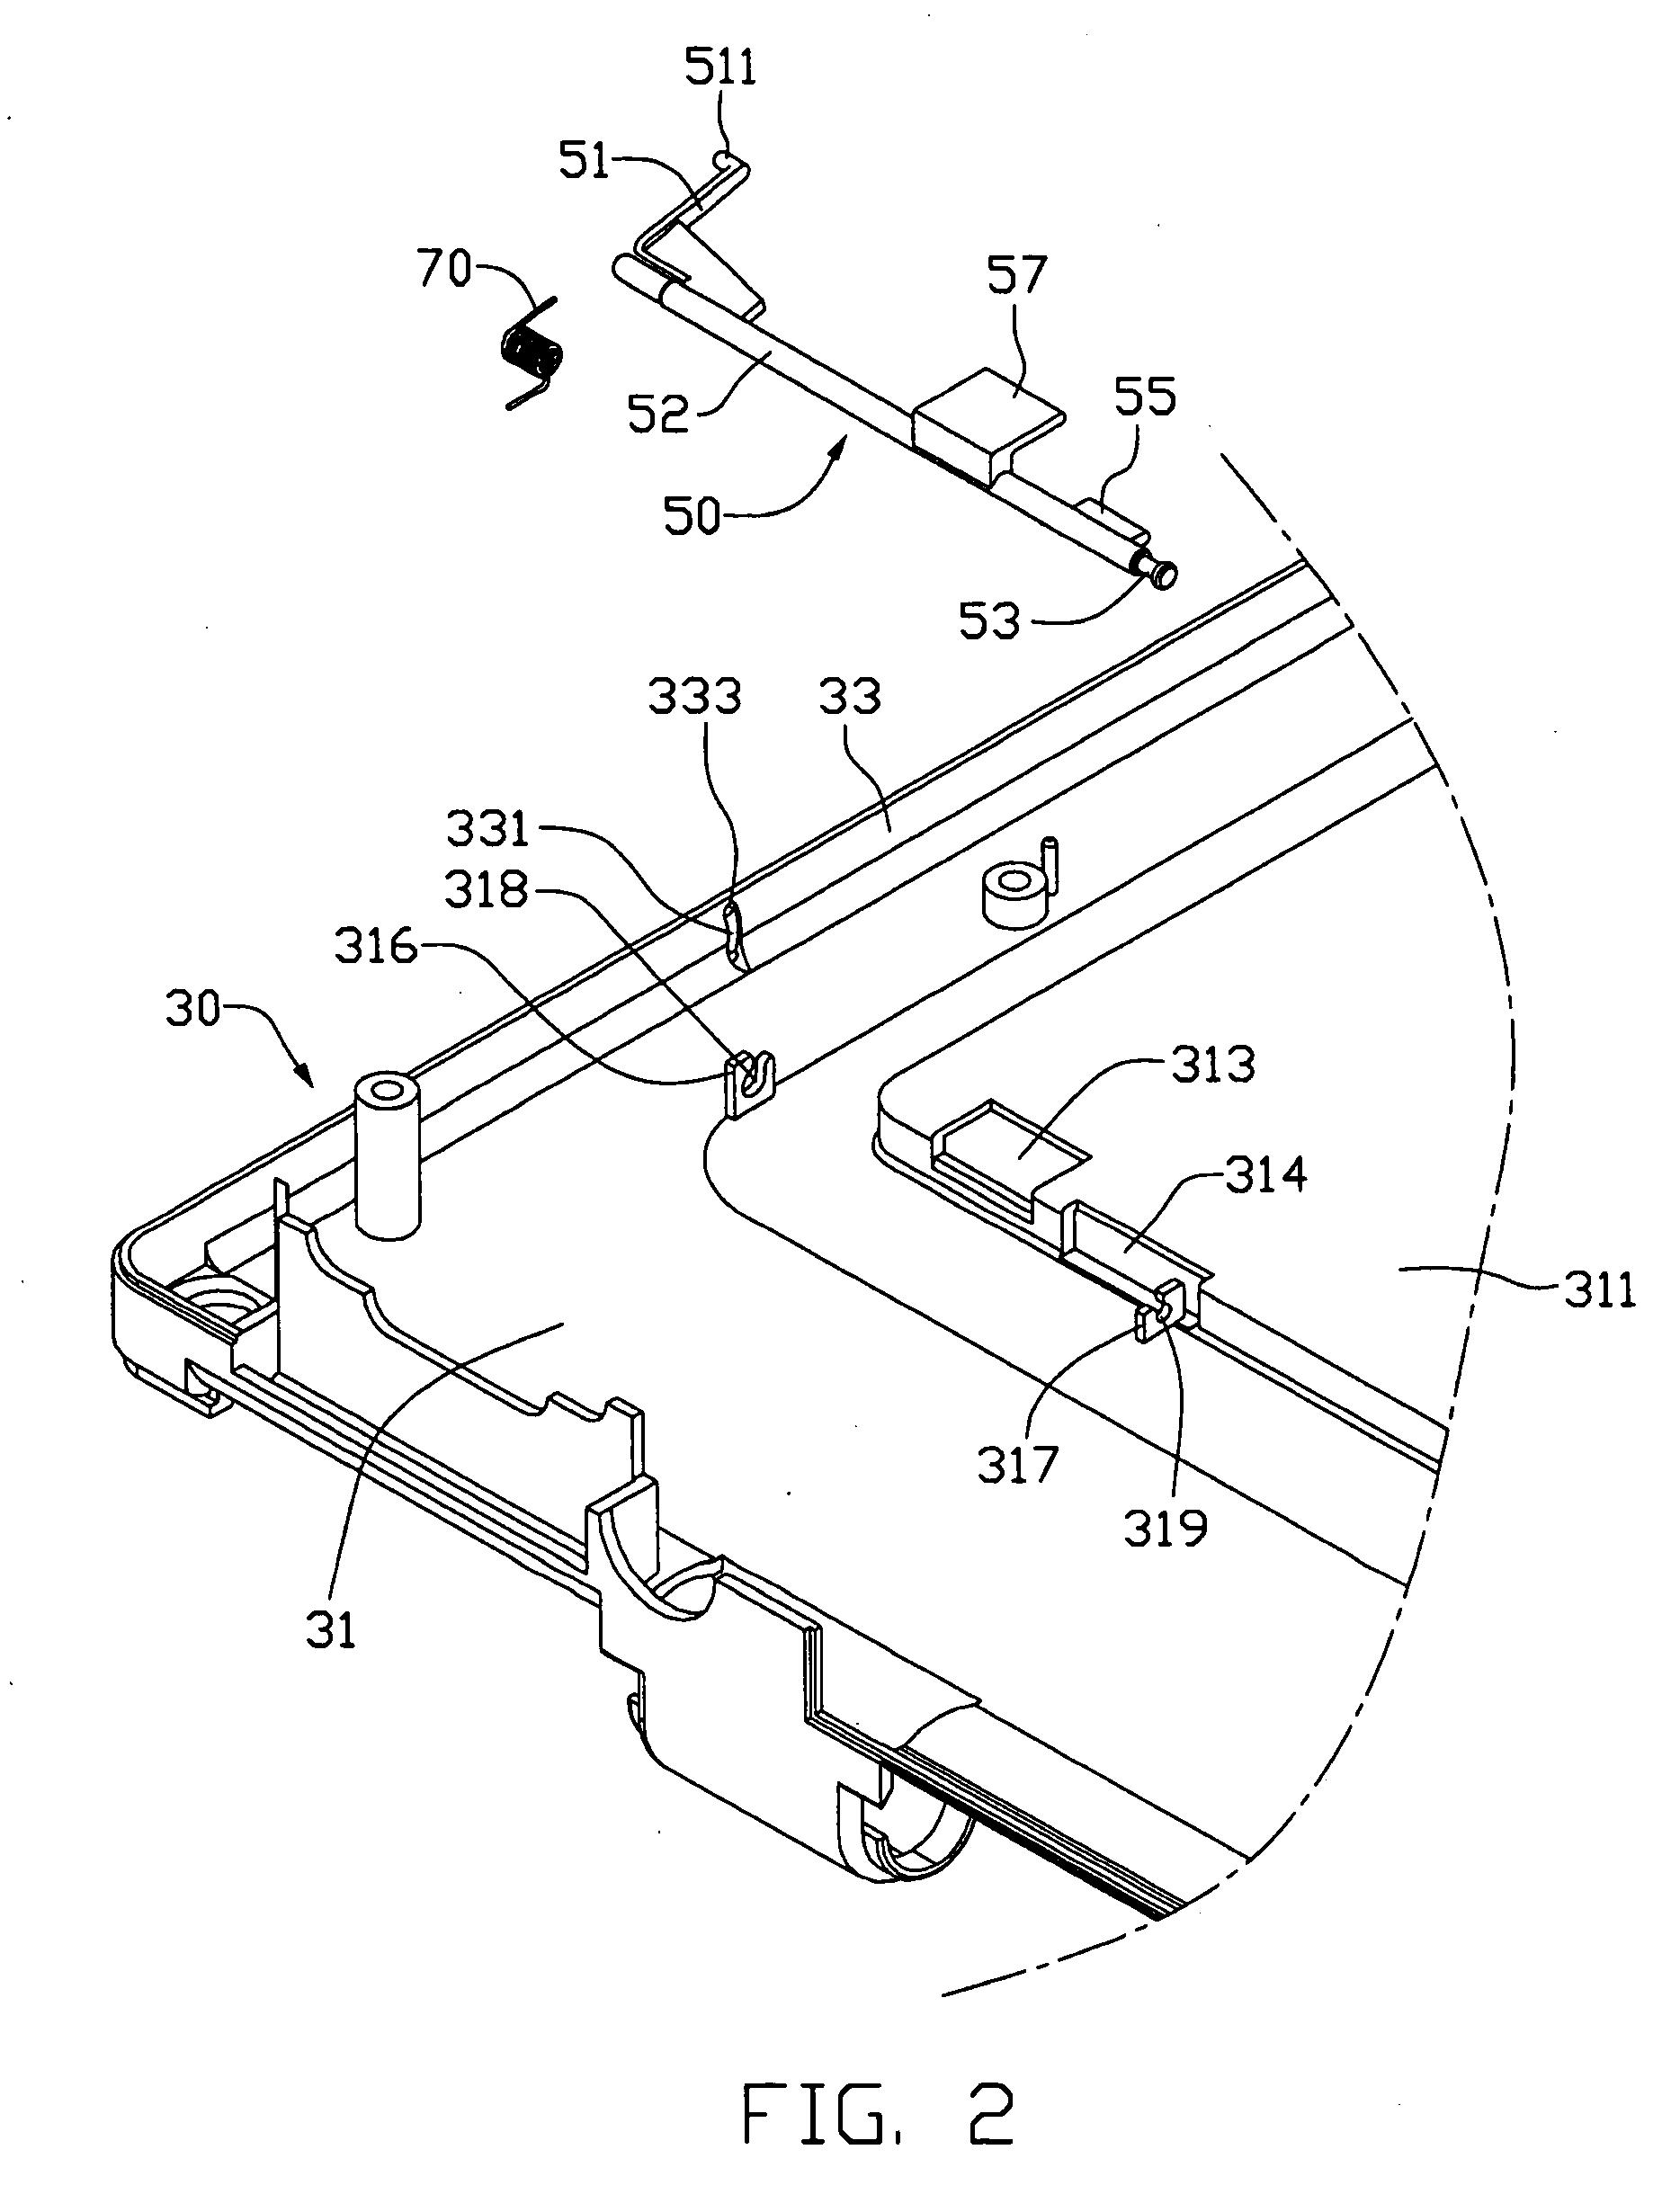 Securing assembly for keyboard of portable computer